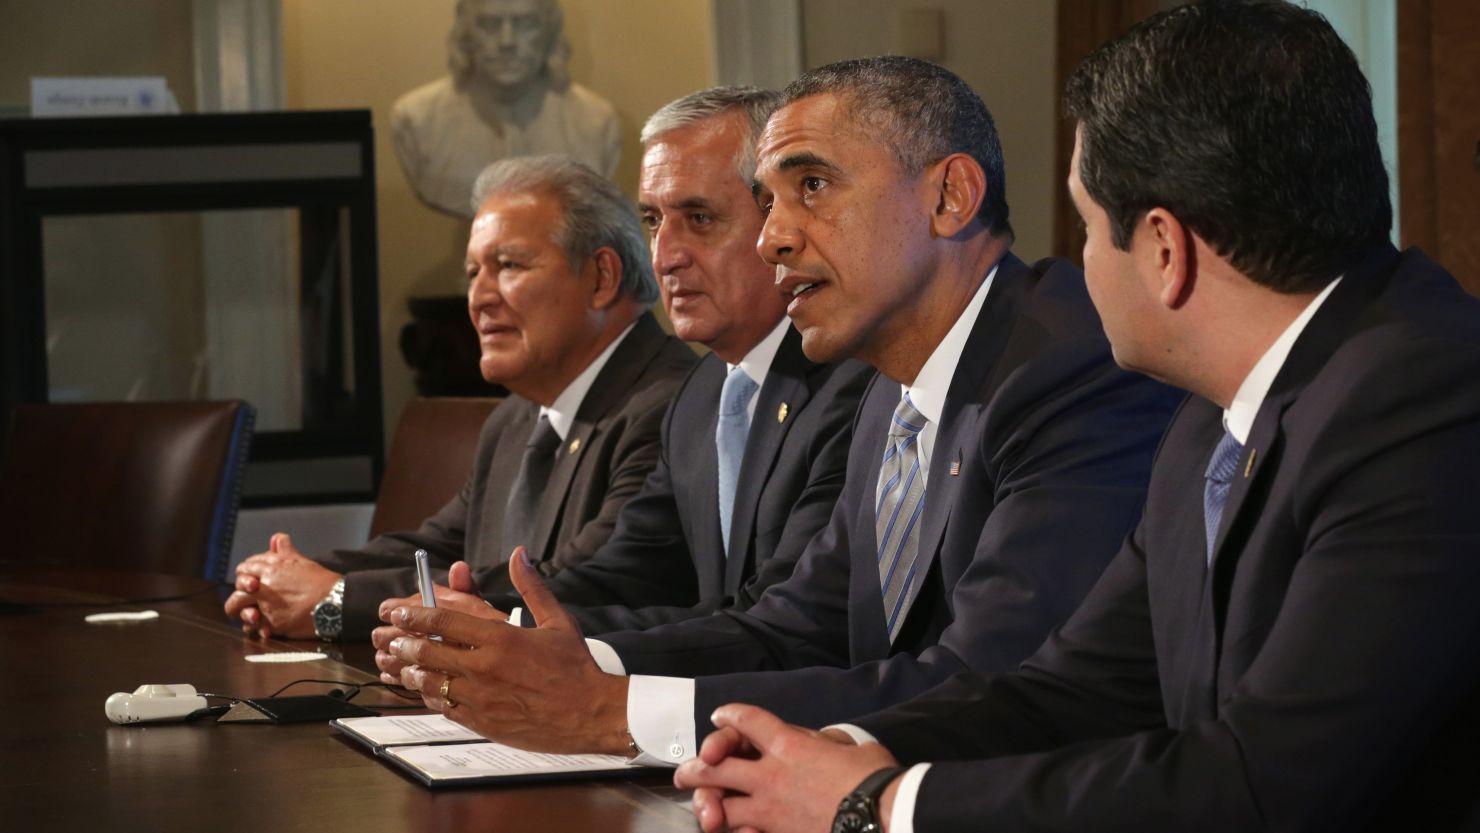 President Obama meets with Central American leaders